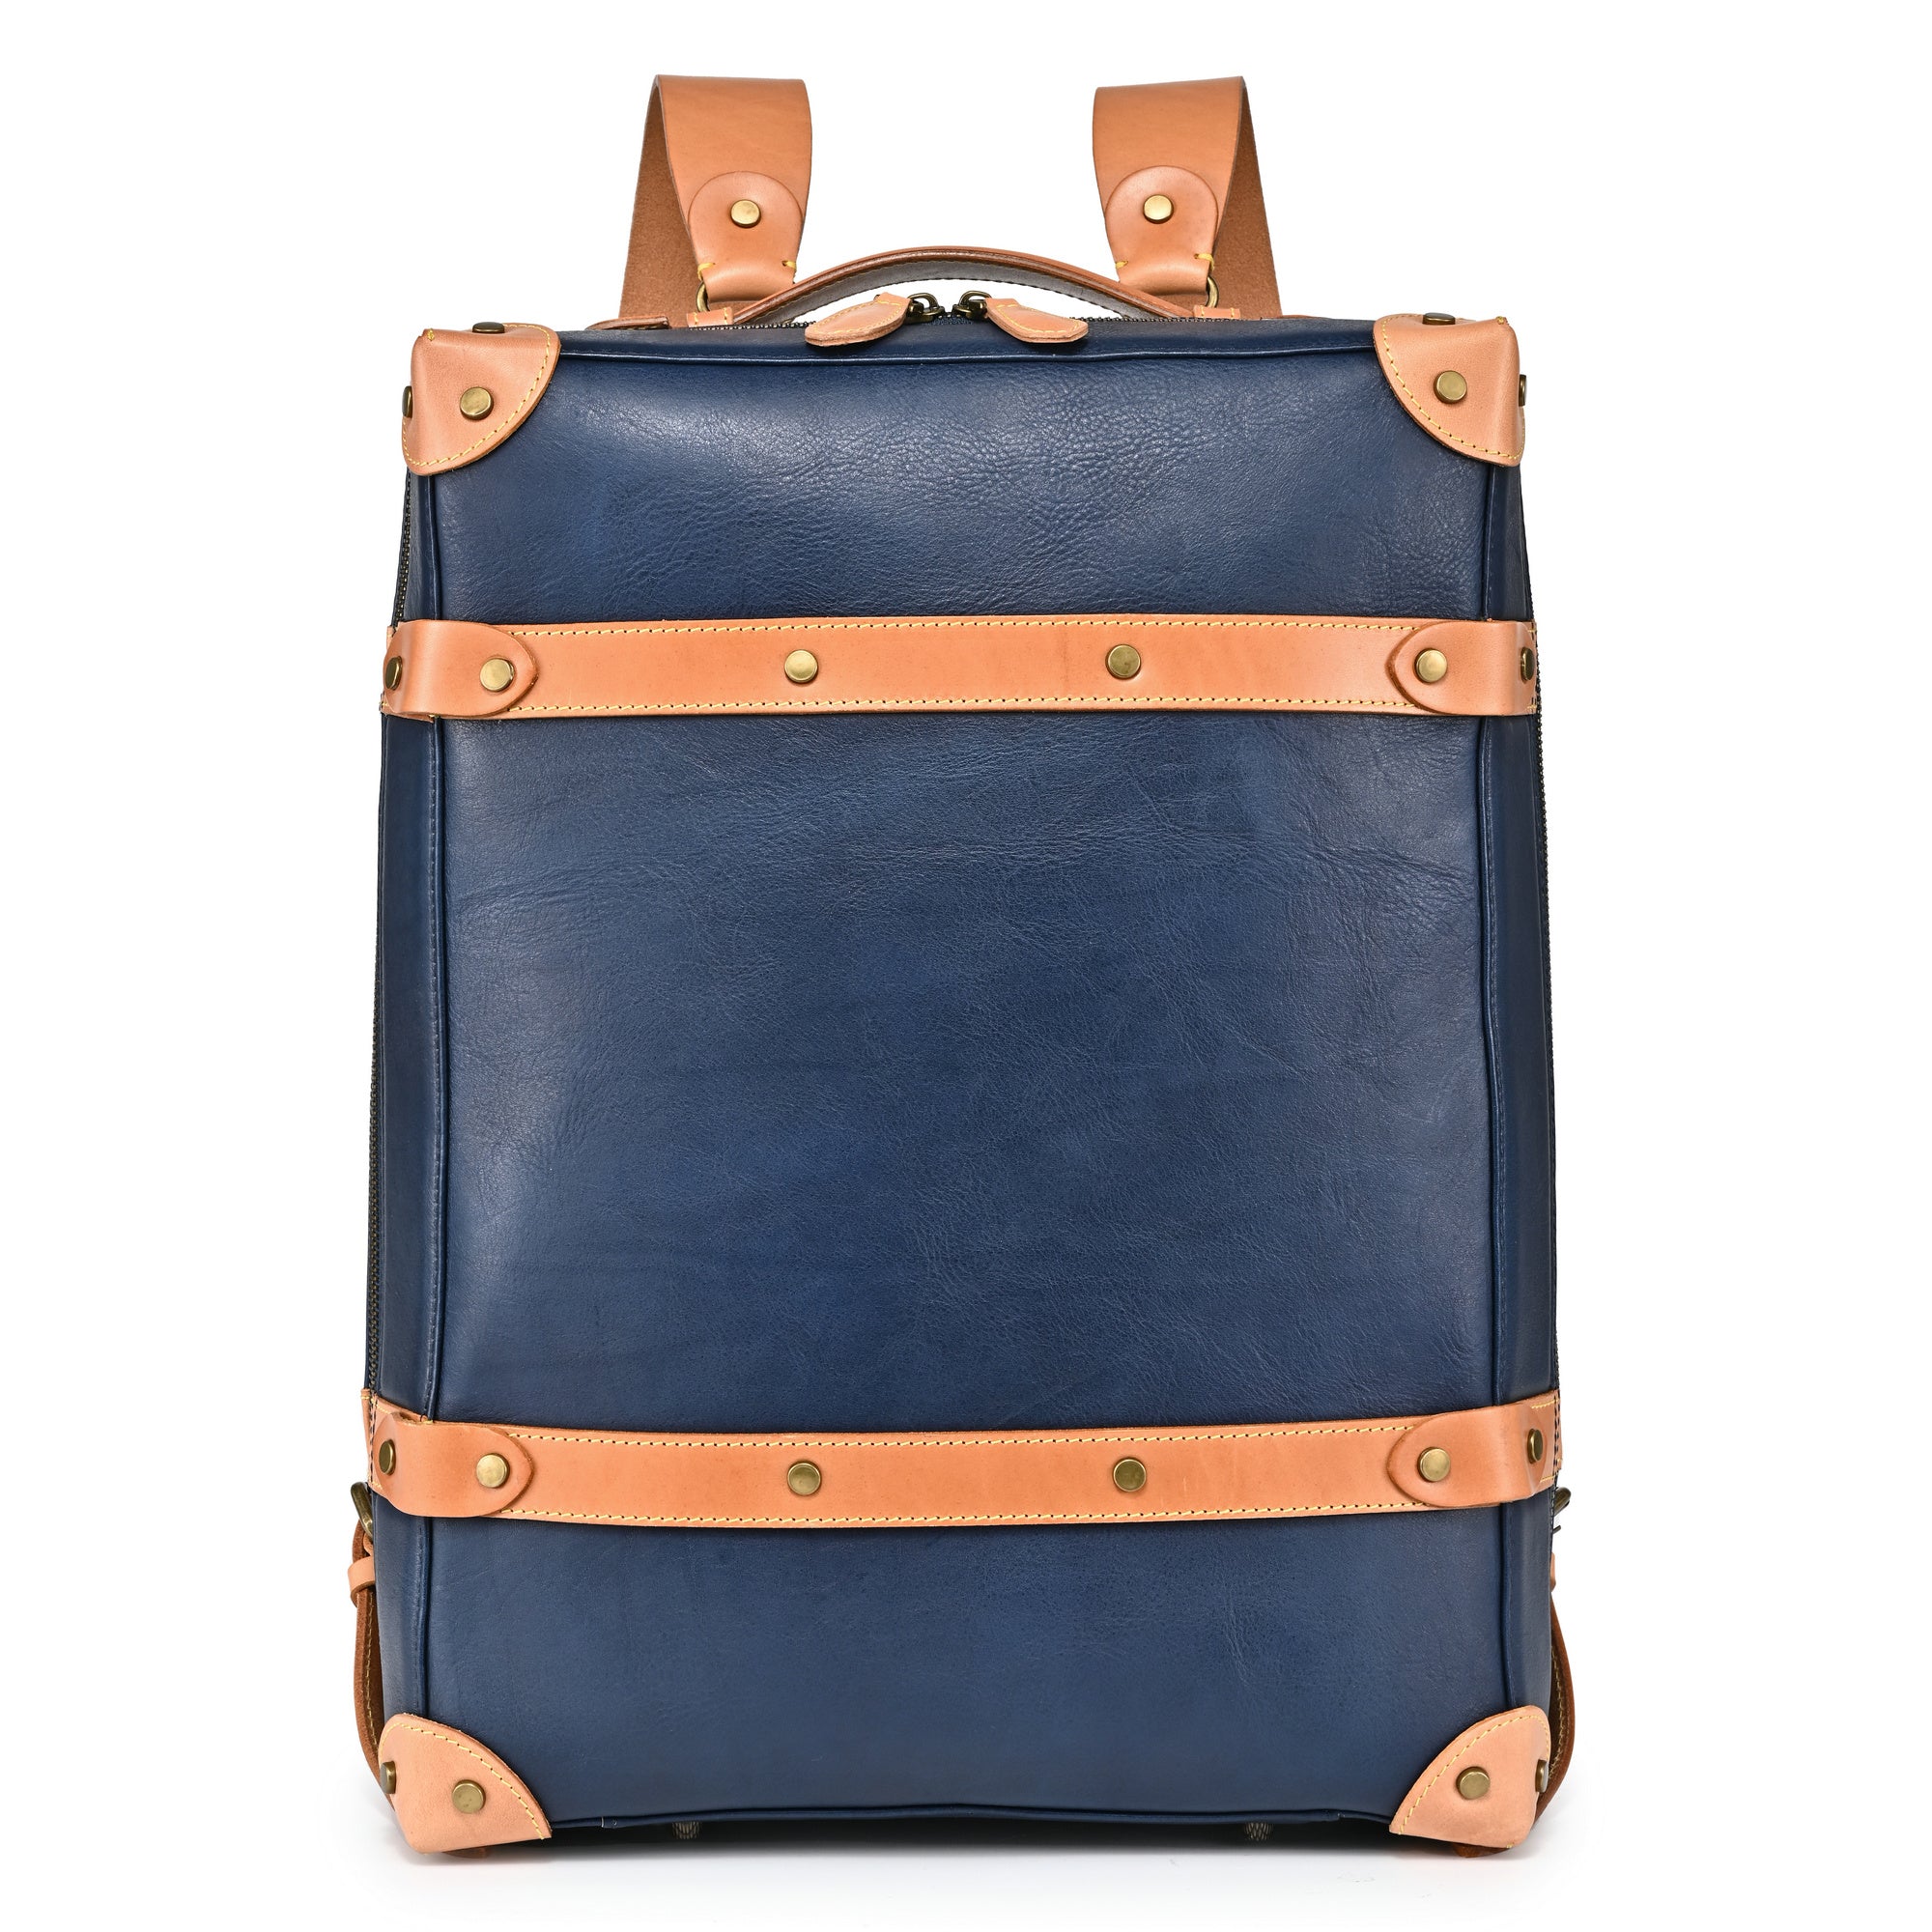 Speedwell Trunk Backpack